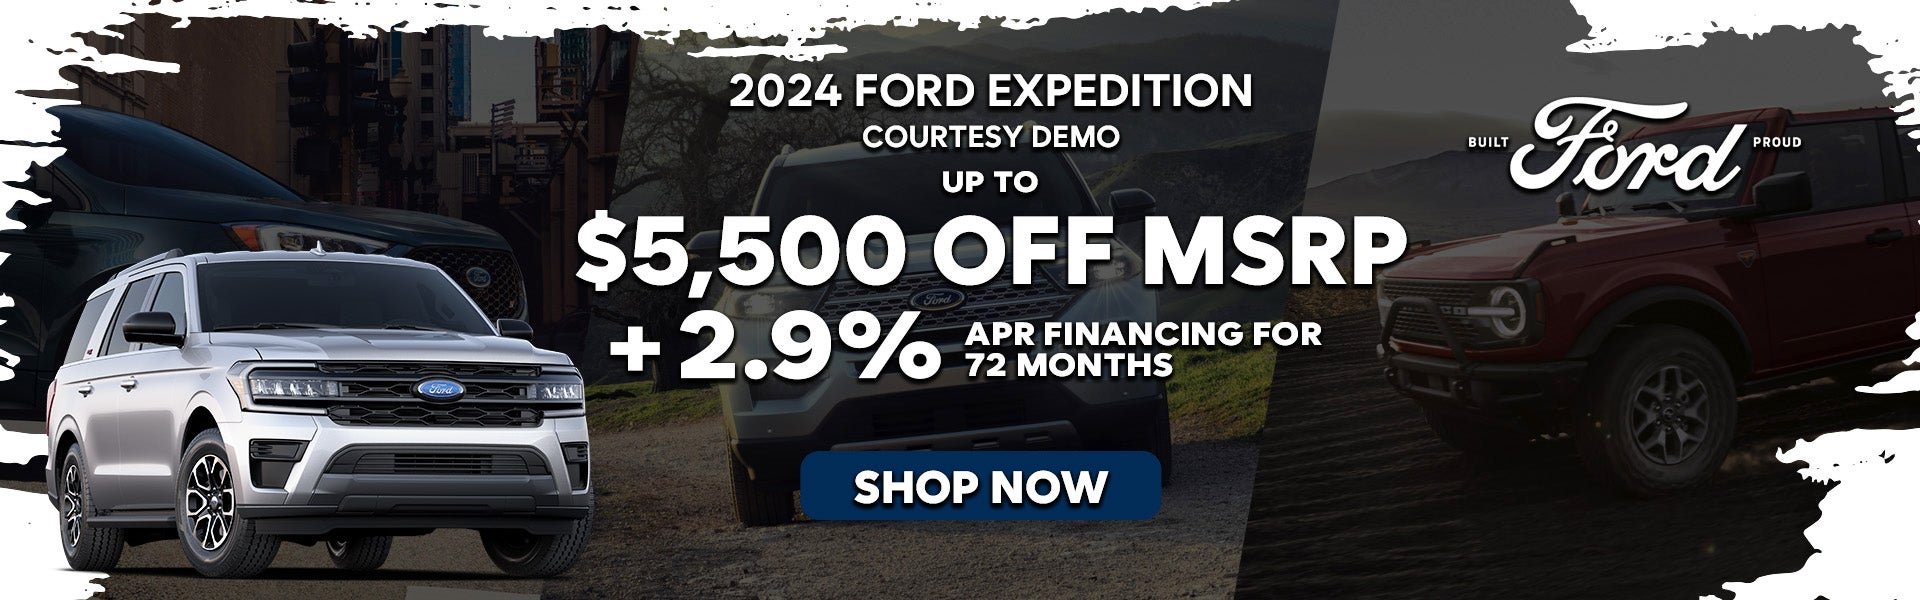 2024 Ford Expedition Courtesy Vehicle Special Offer